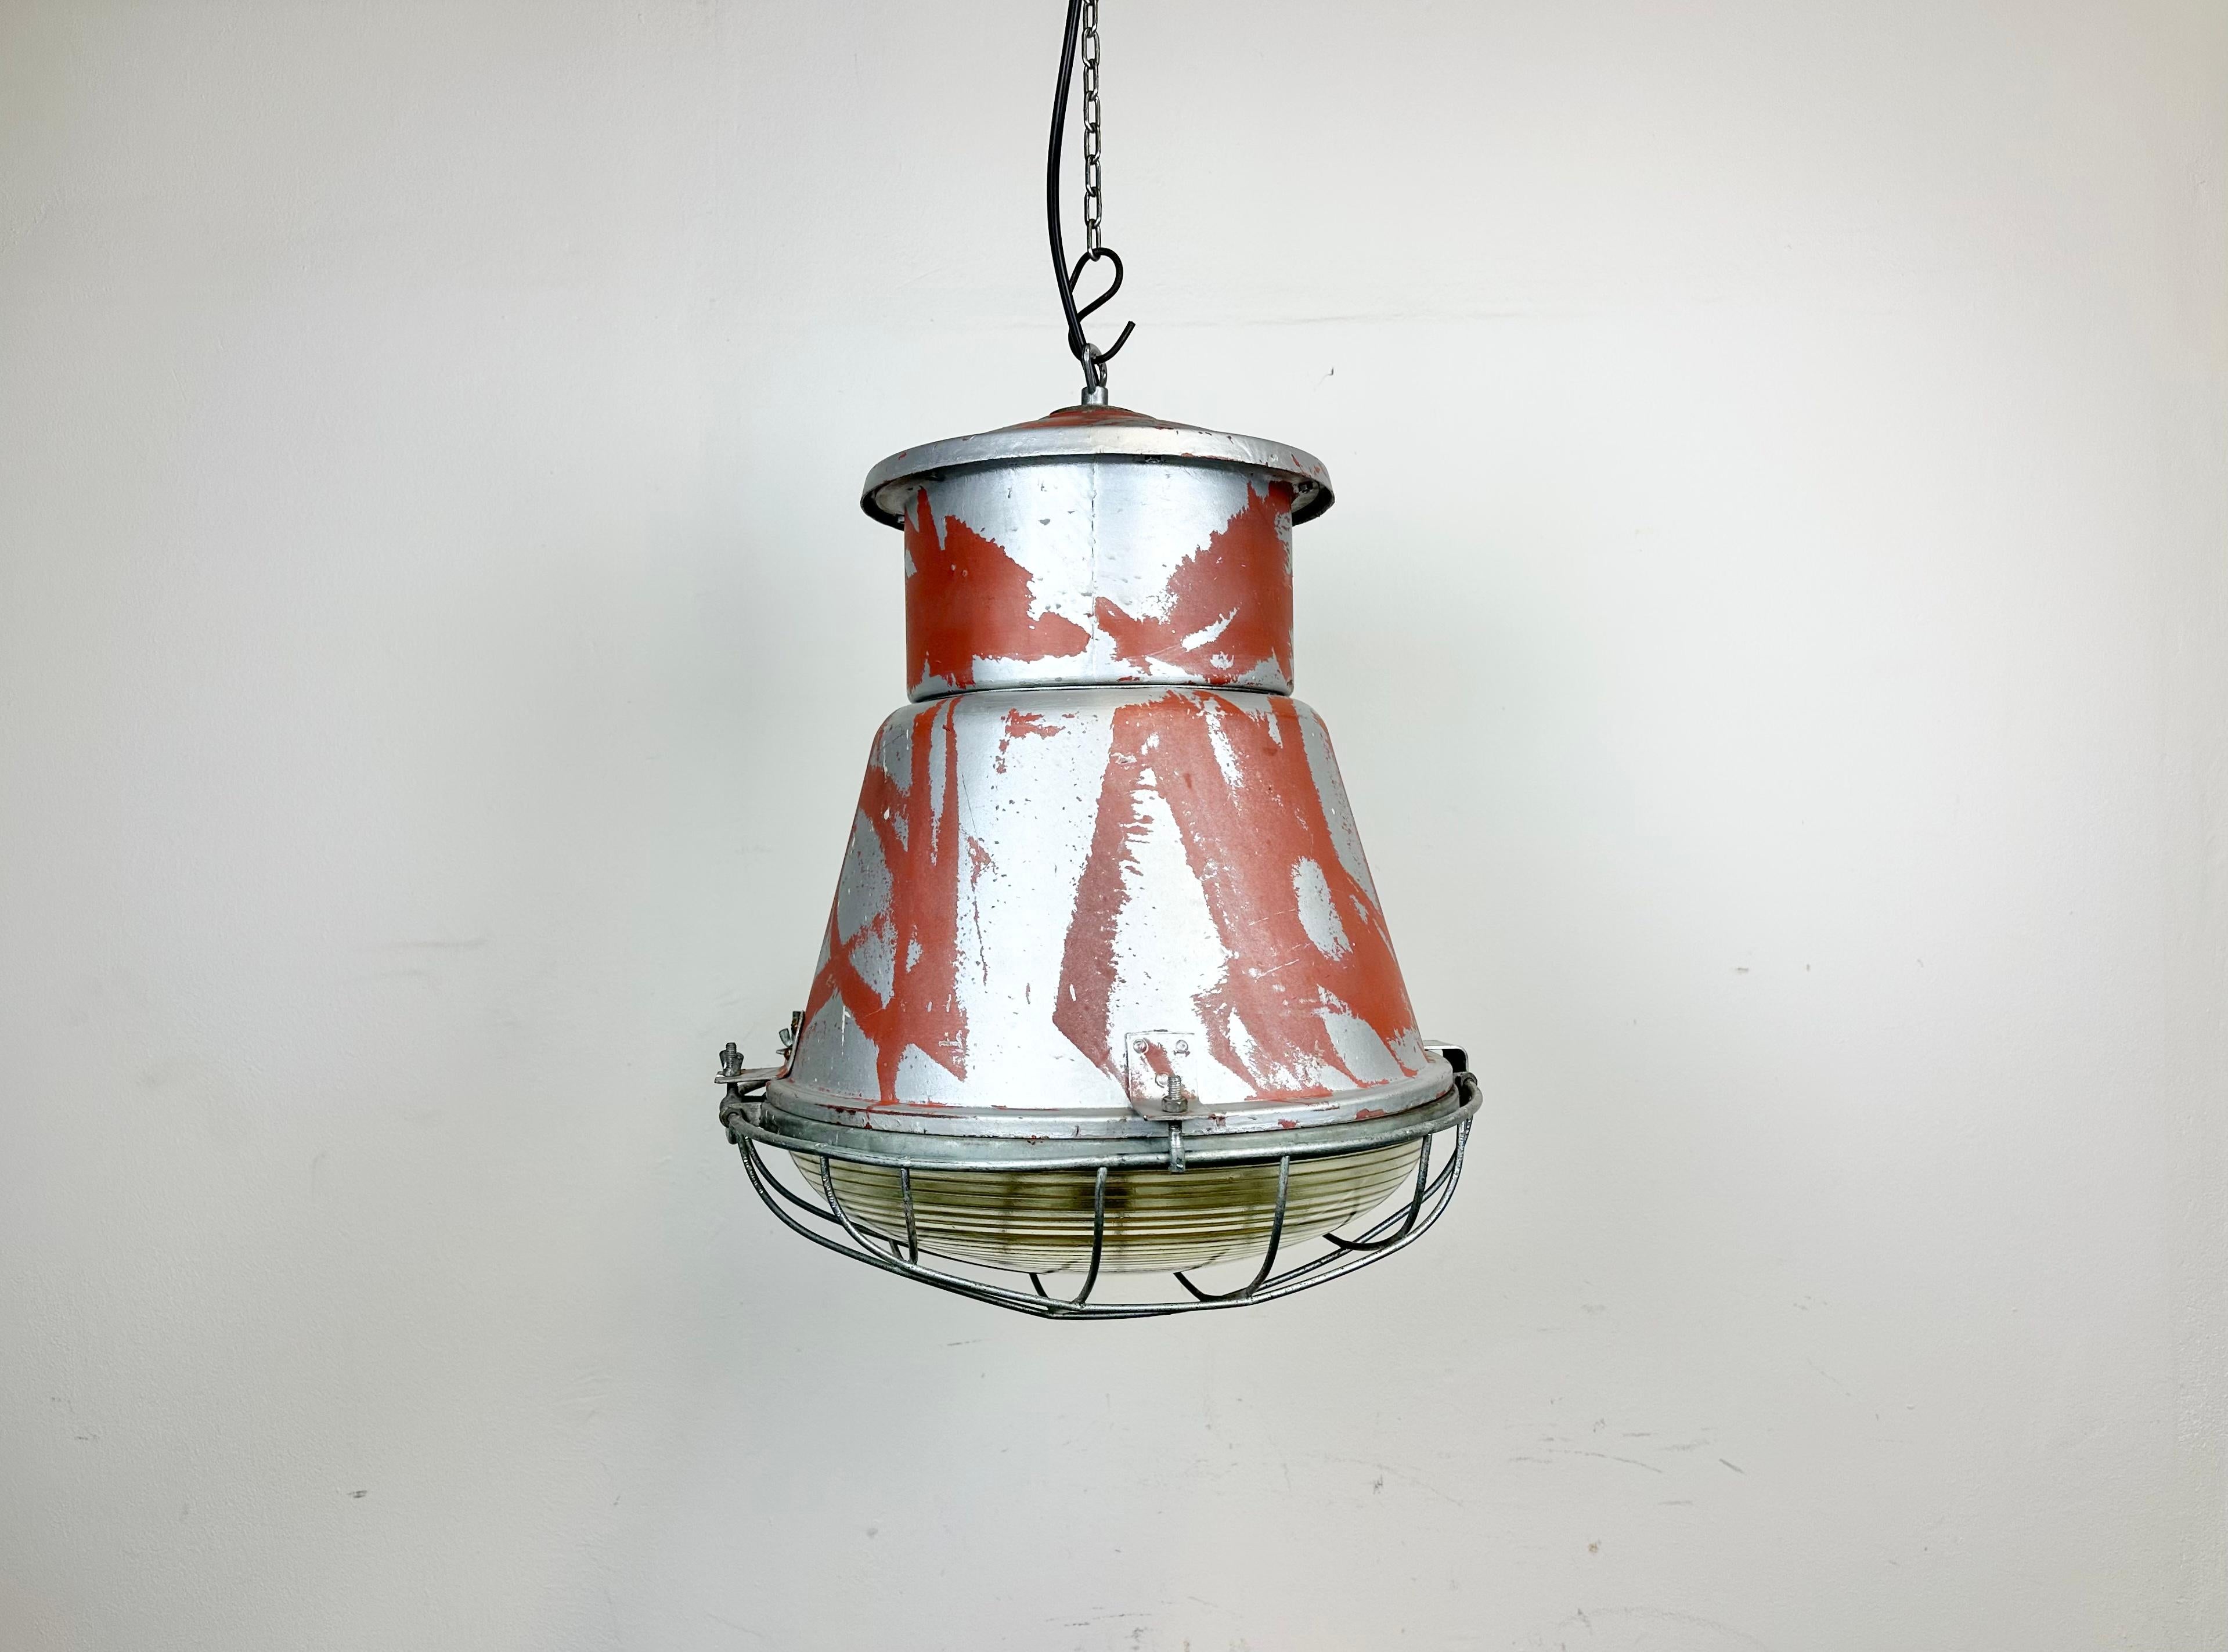 Vintage industrial hanging lamp manufactured in 1970s by MESKO in Skarzysko-Kamienna in Poland. It features a grey iron body, an iron cage and convex glass cover.. The porcelain socket requires E 27/ E26 light bulbs. New wire. The weight of the lamp